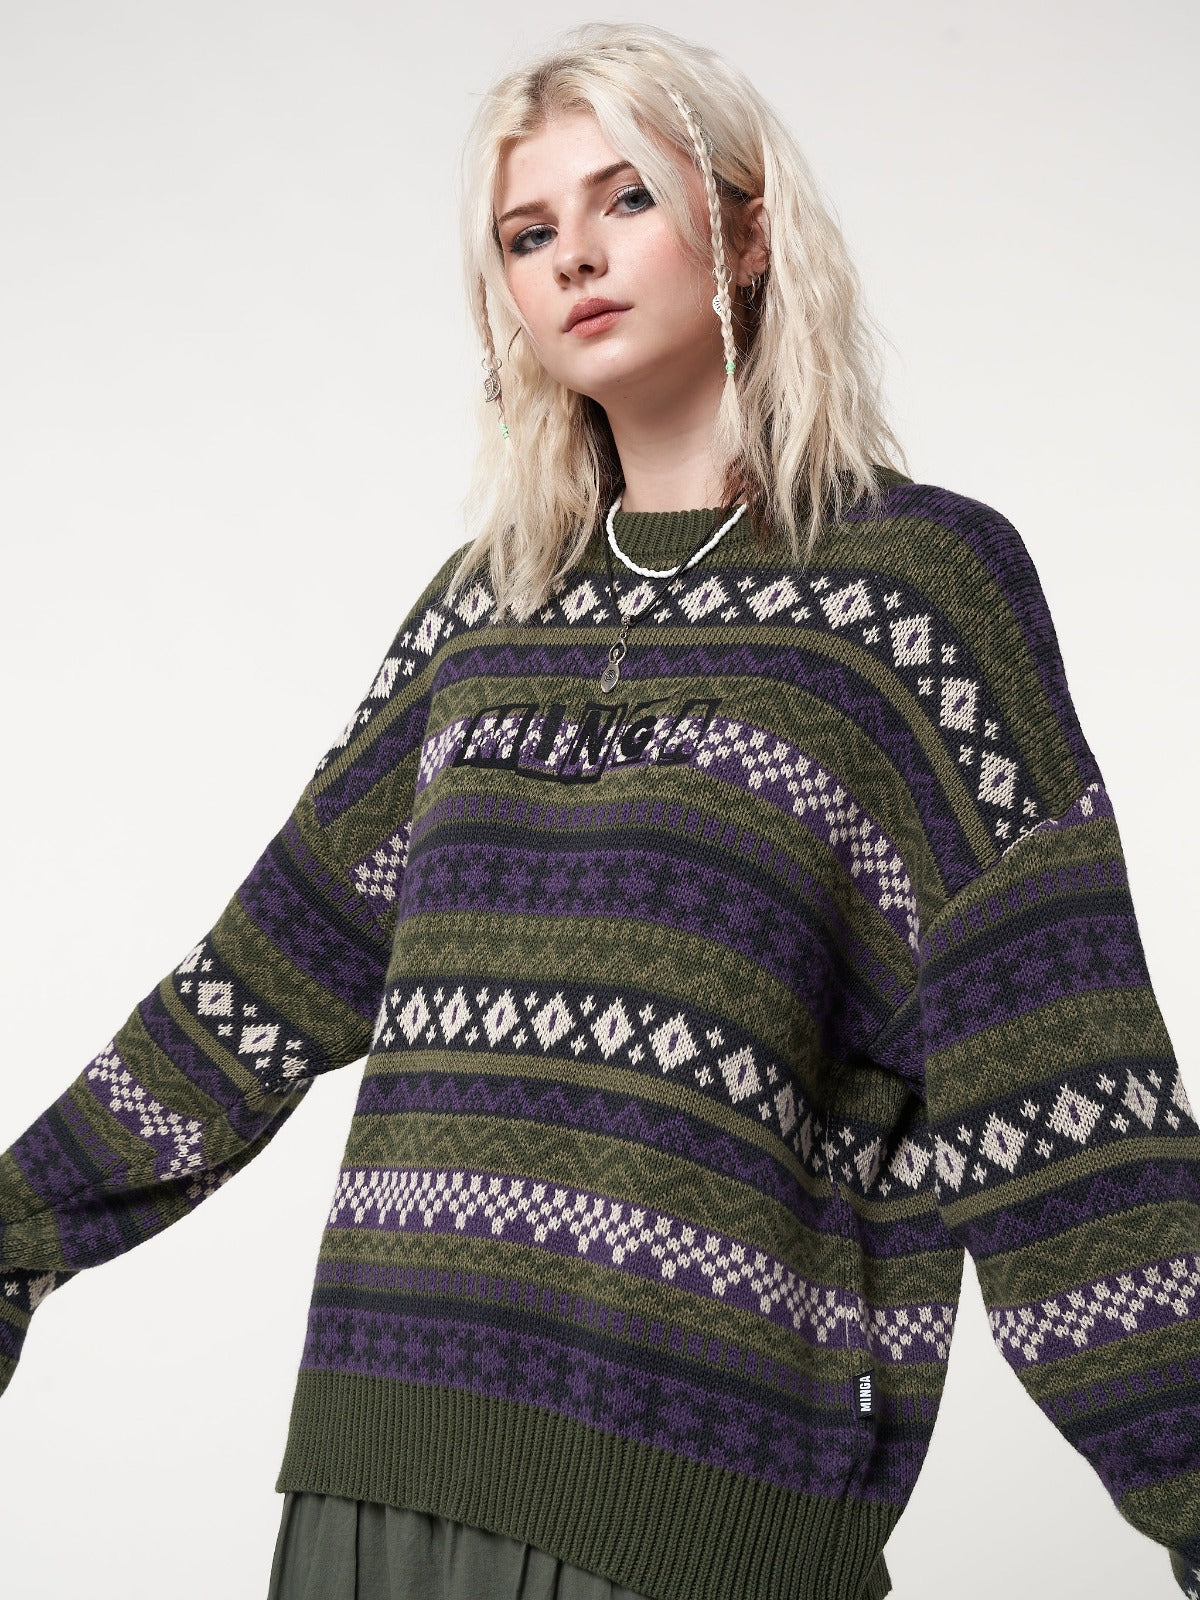 Jacquard knit jumper in green and purple with thumbhole cuffs